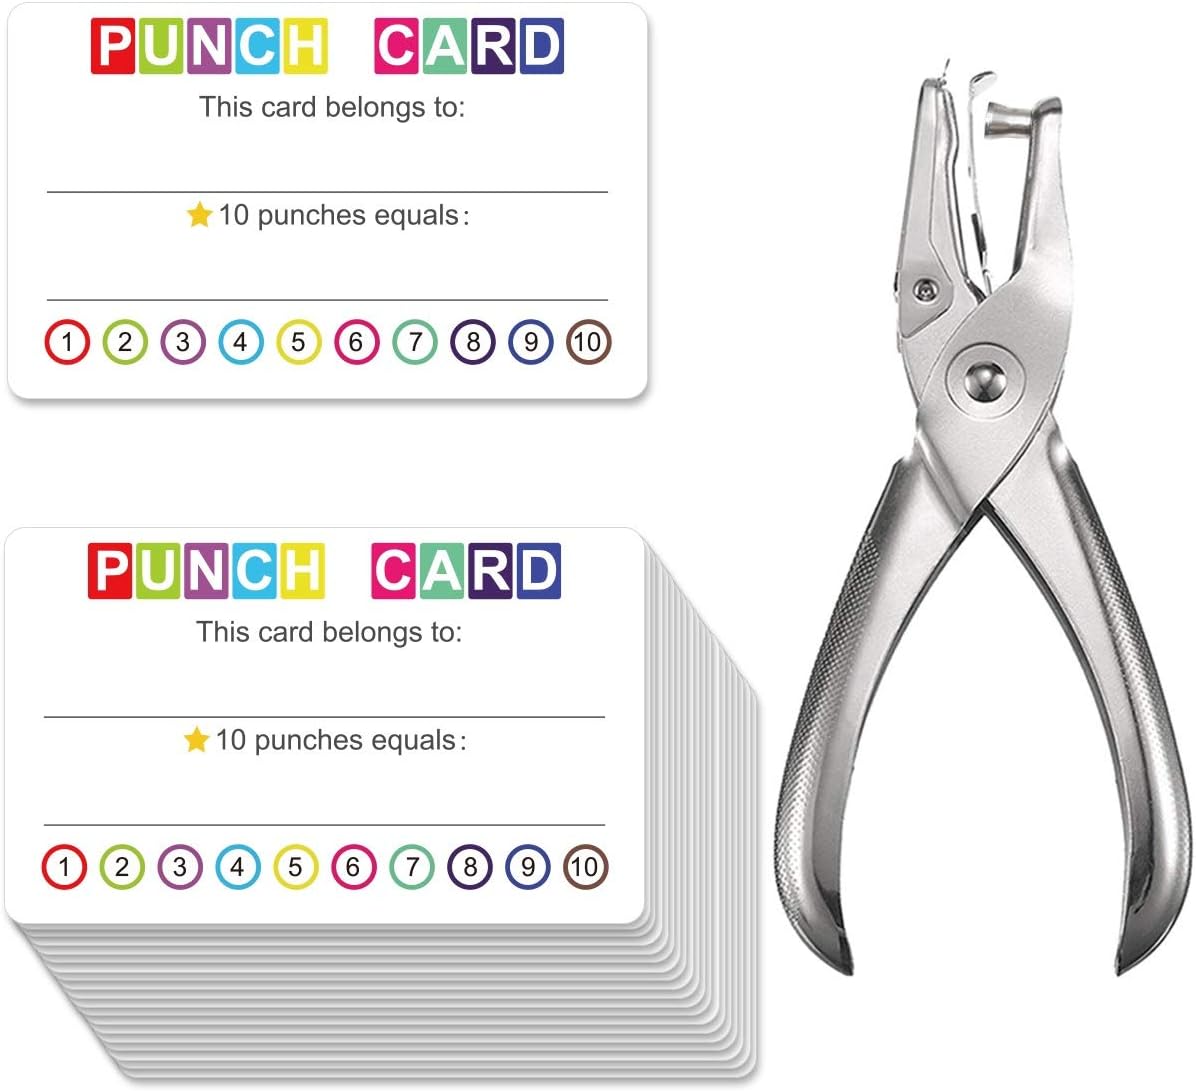 20 Amazon Classroom Items Every Teacher Needs for Under $10

classroom, teacher, teacher essentials, teacher gadgets, classroom essentials, hole puncher, hole punch, punch card